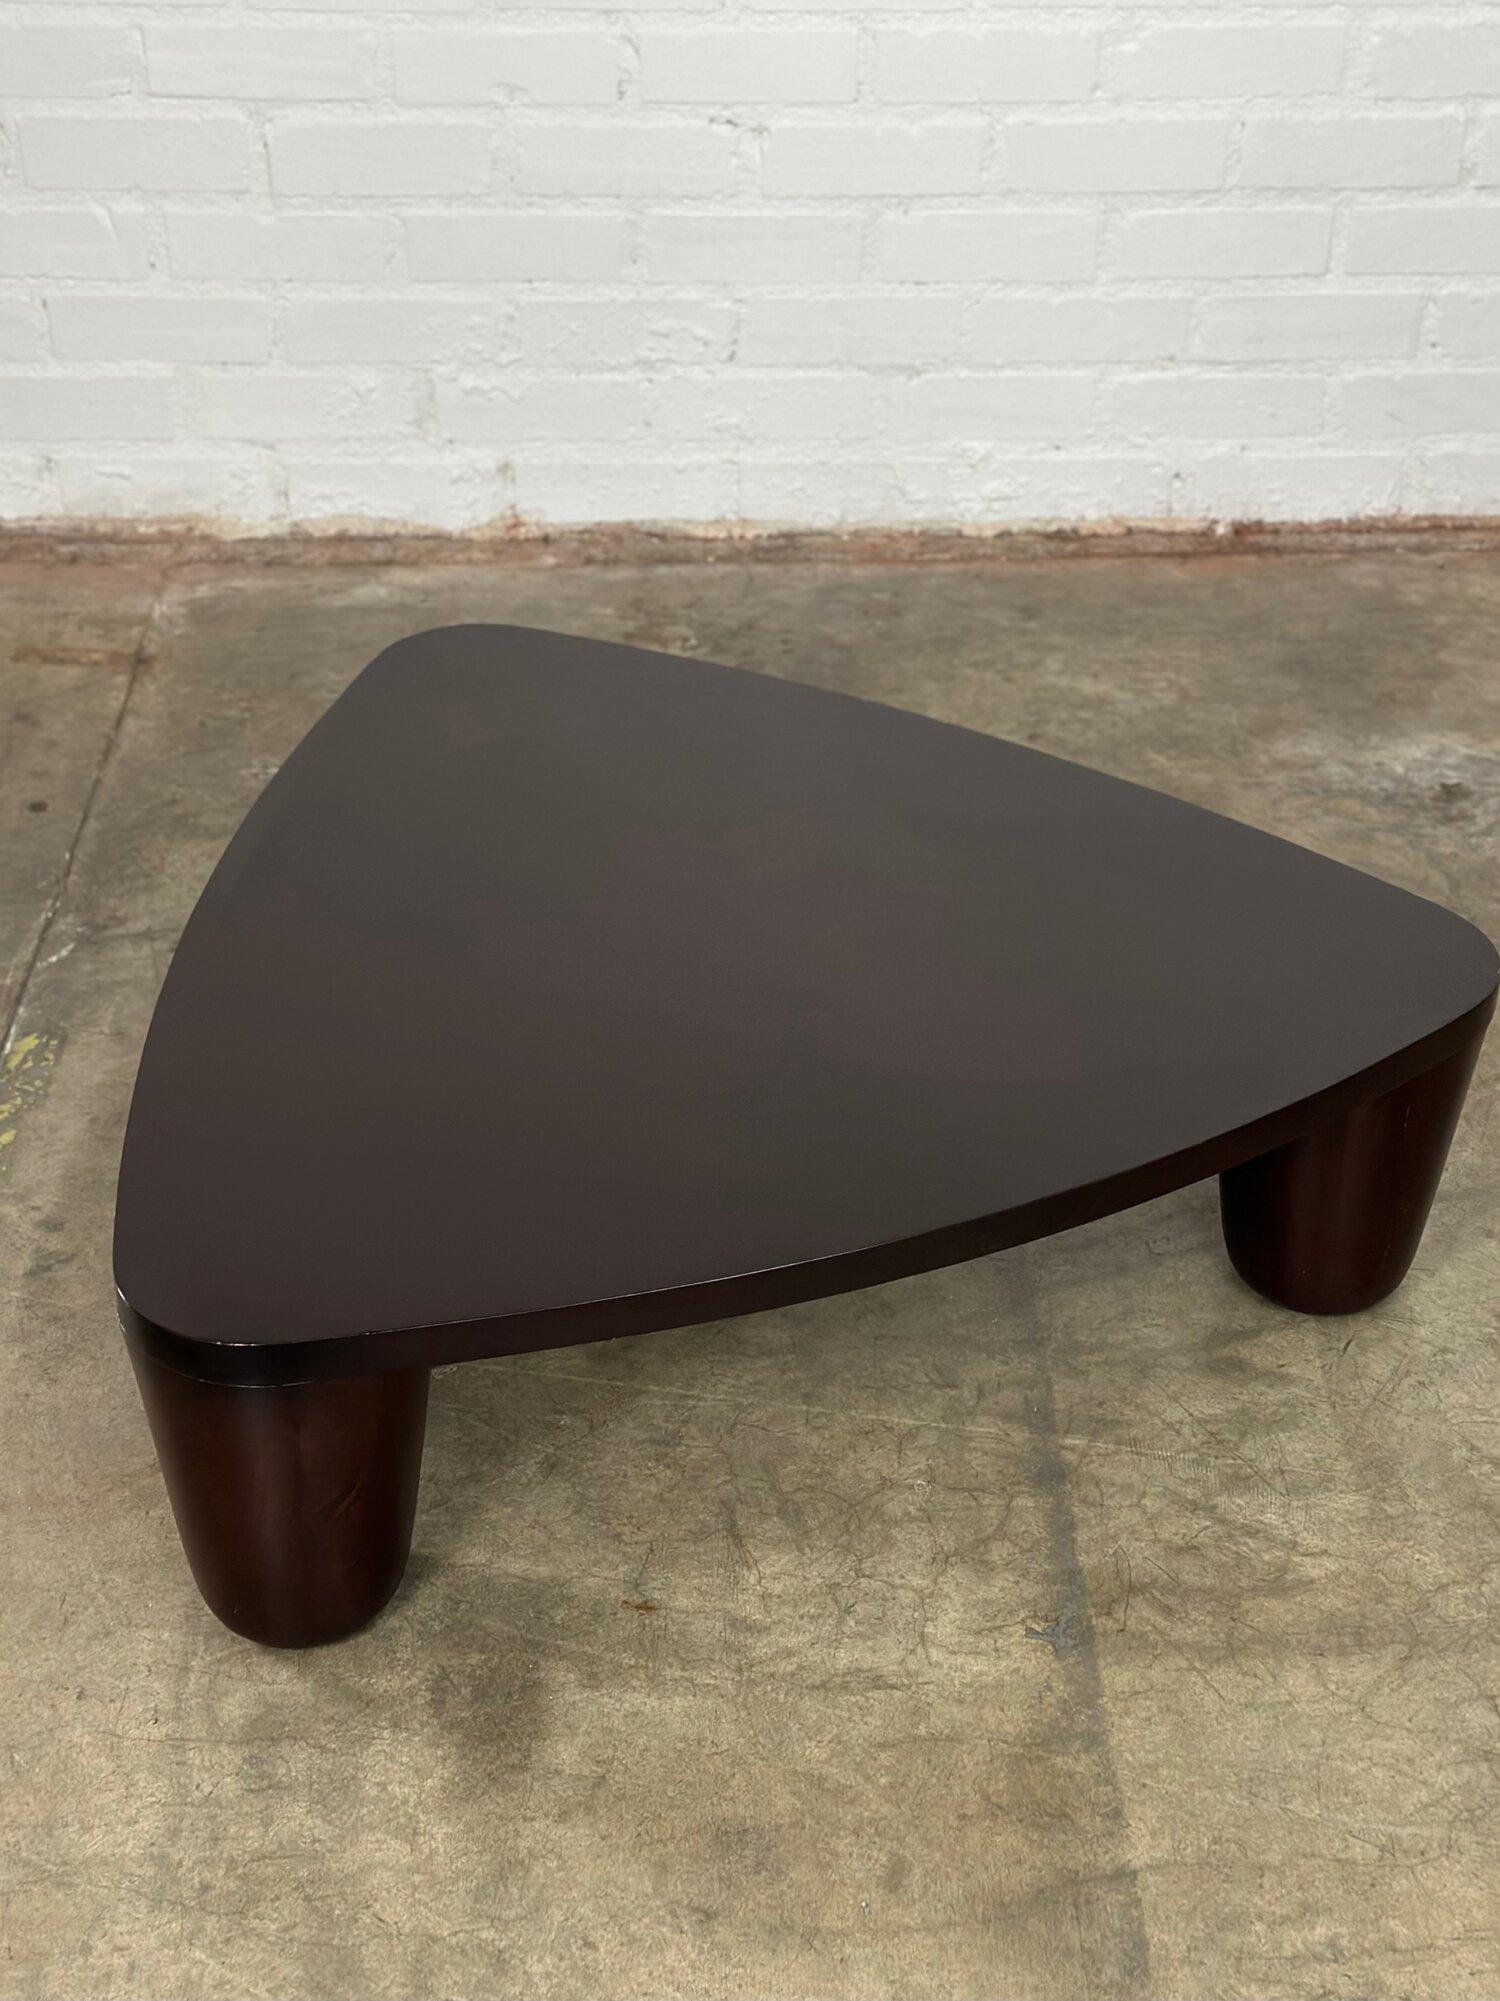 Measures : W41 D40 H12

This coffee table has a unique Primitive esthetic in a modern chic construction with a deep espresso finish. The legs are a chunky cone at each point of the triangle adding to the Primitive style. Over all in good restored